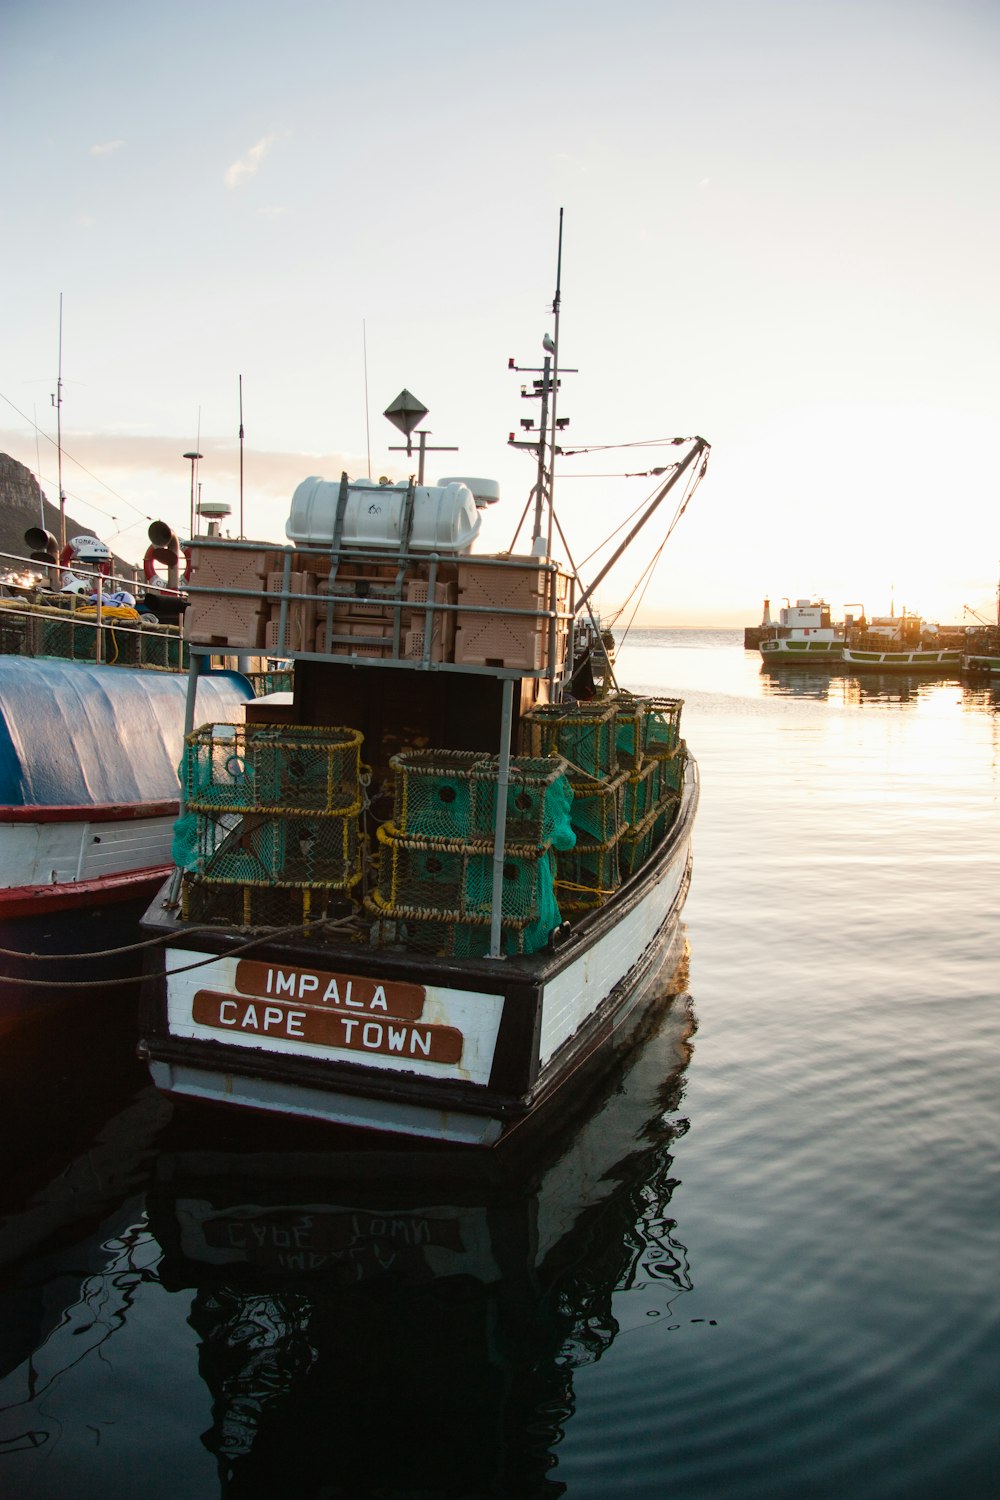 white and black Imapala Cape Town fishing boat on body of water during sunrise